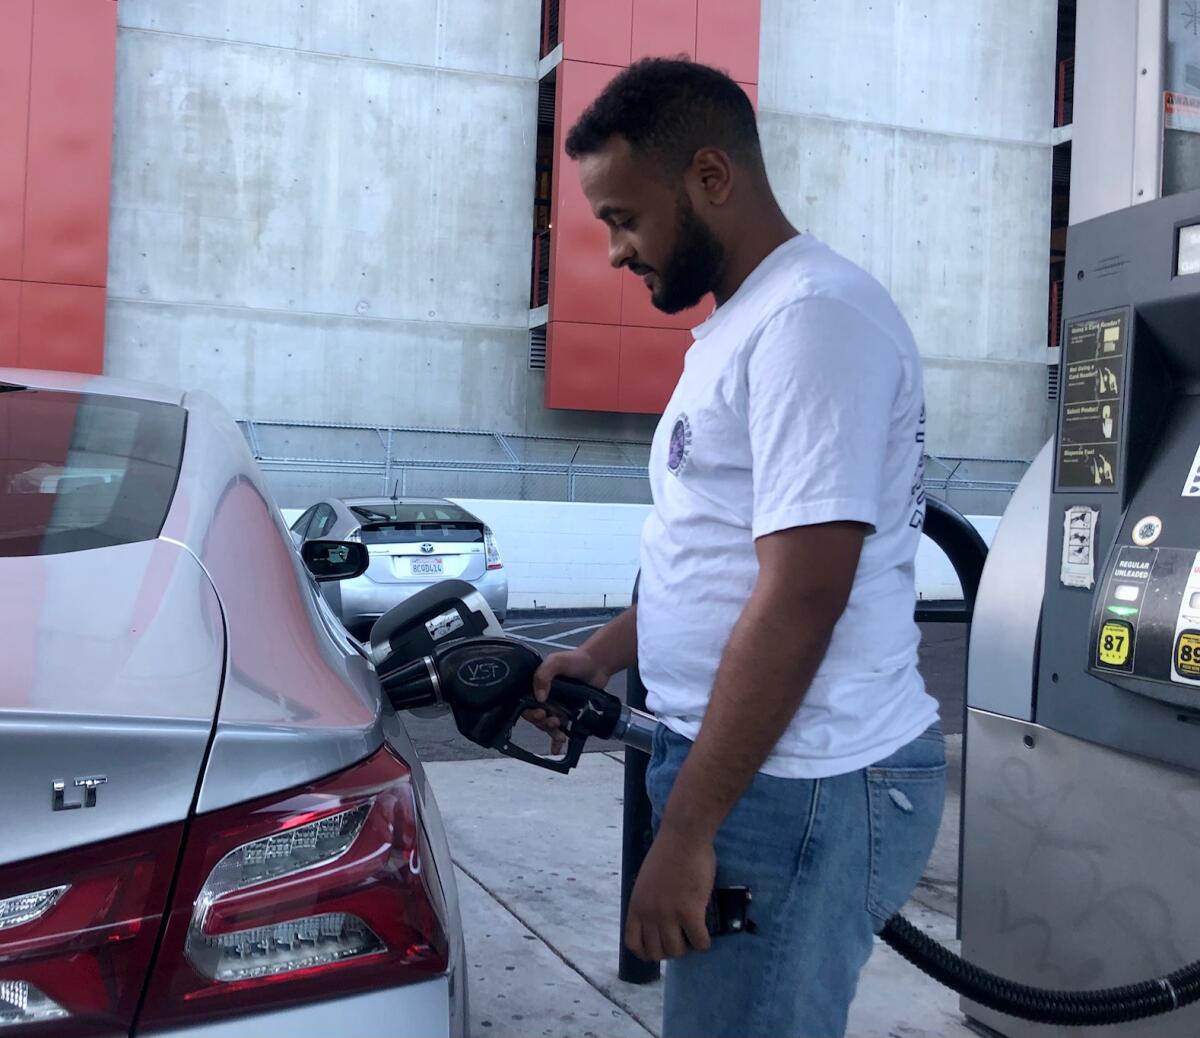 Ermias Yohannes of East Village fills up his car at a Petromerica station. 